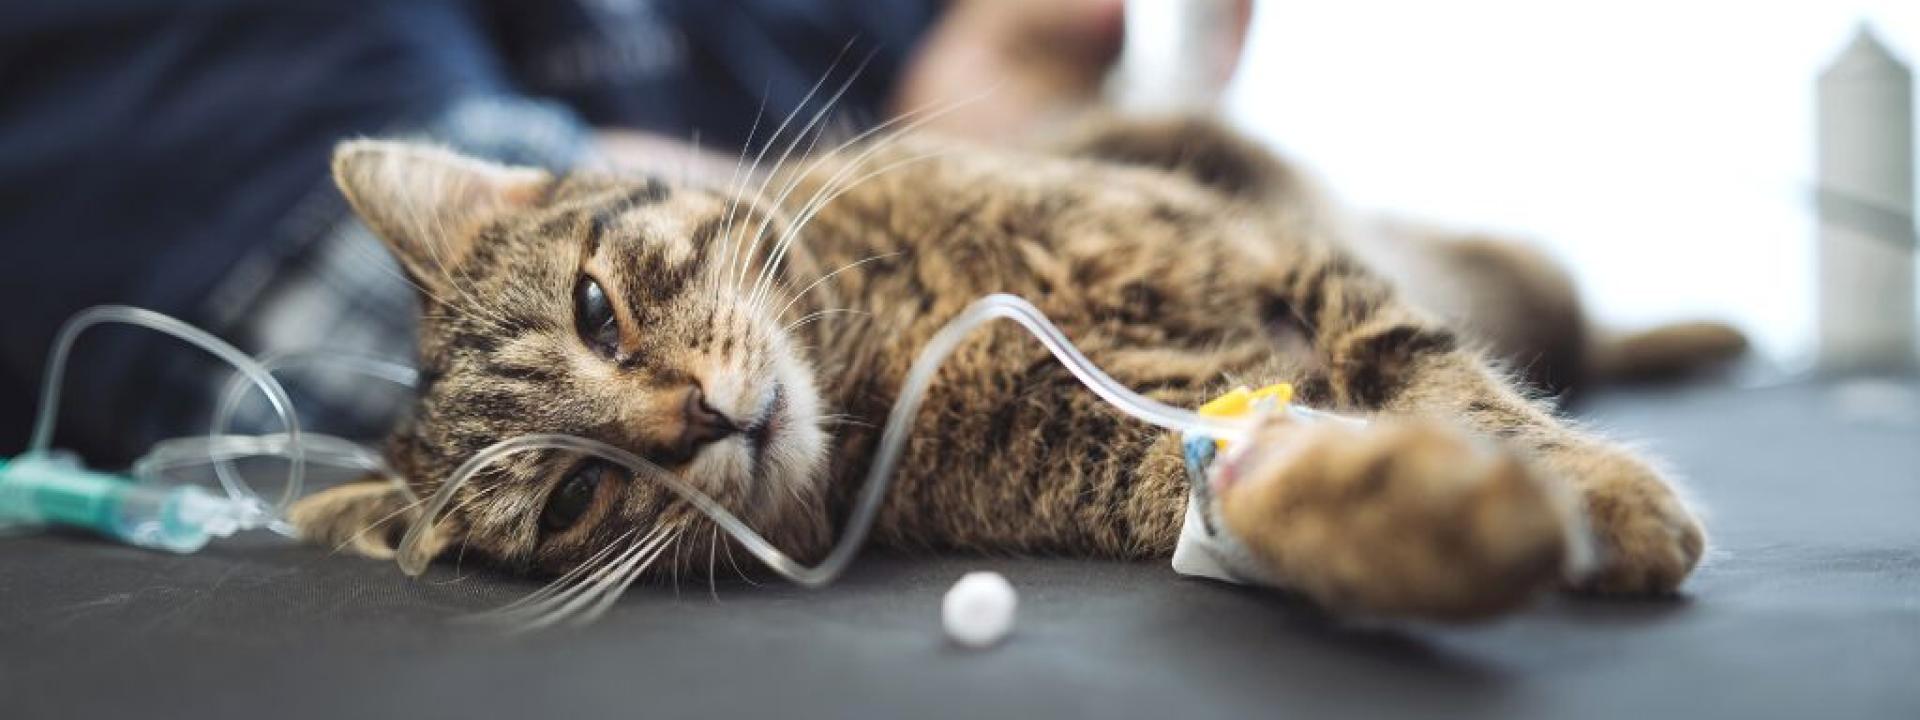 Cat gets a drip in a veterinary clinic.